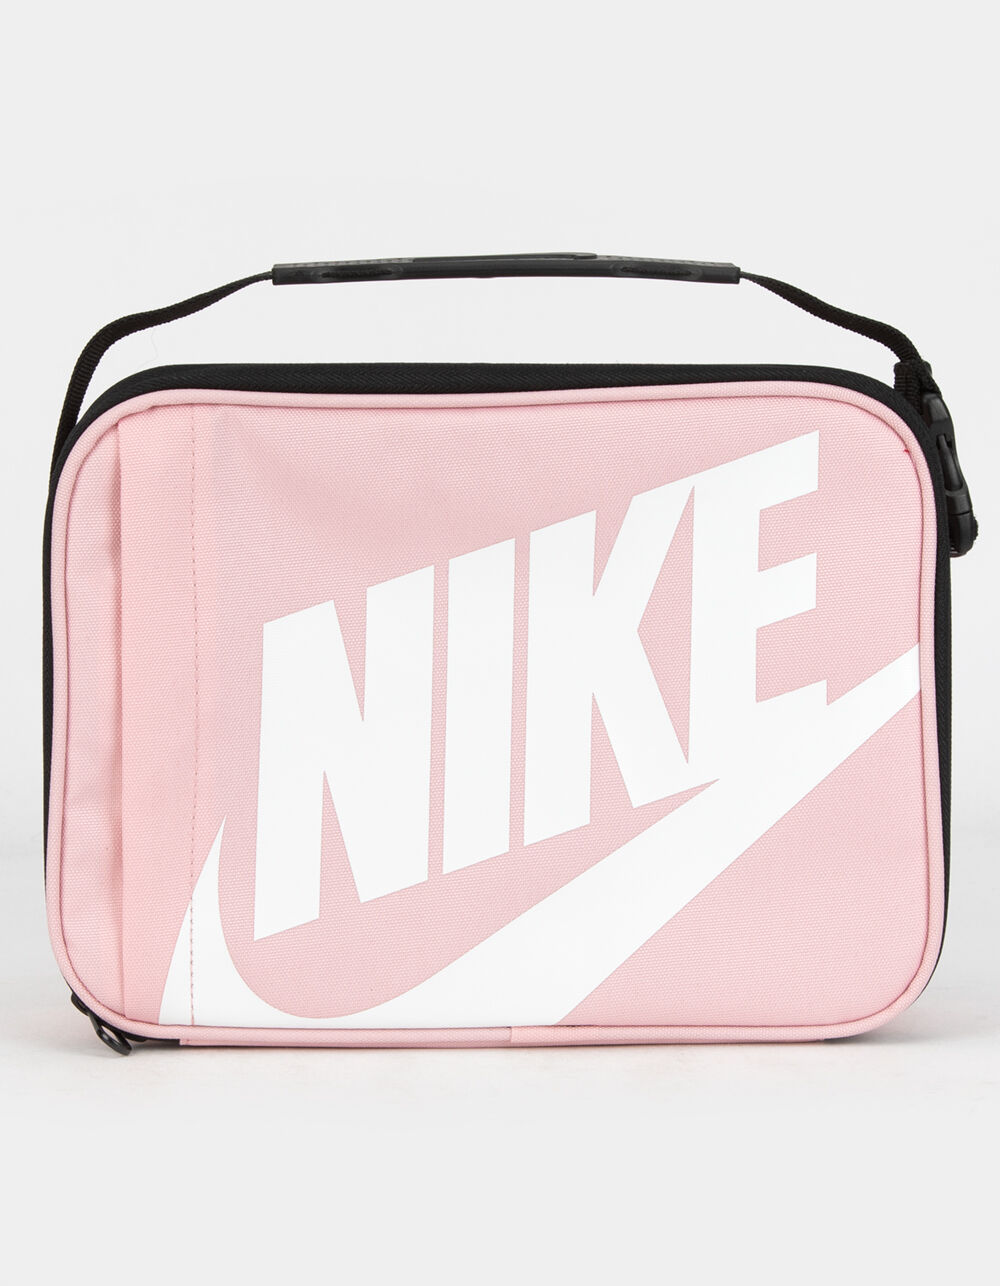 NIKE Futura Fuel Pack Lunch Bag